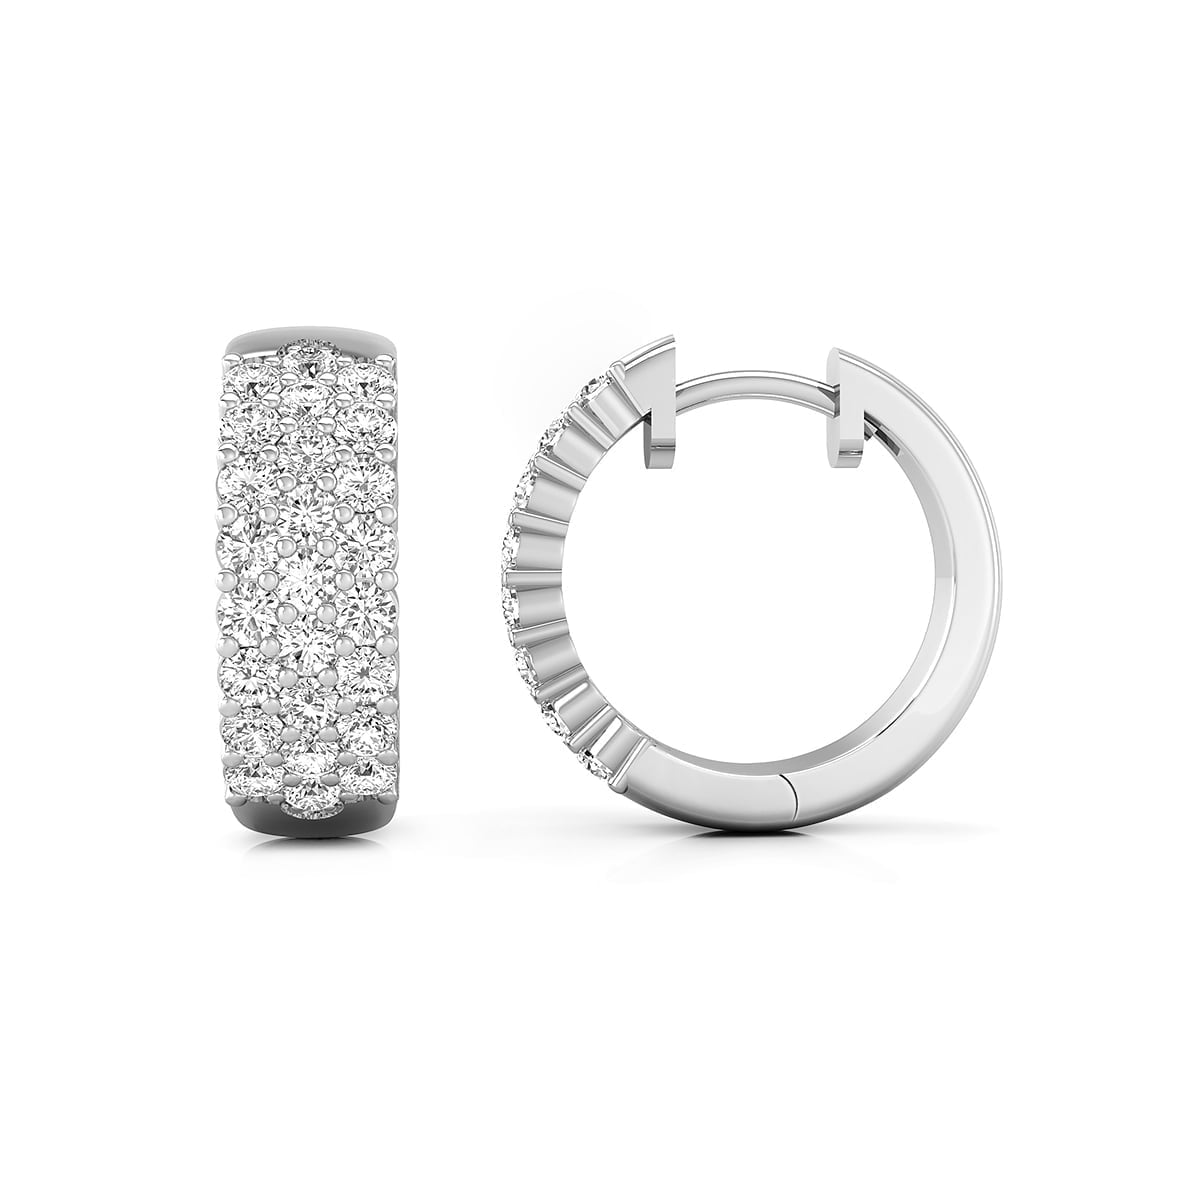 Pave Set Classic Round Cut Moissanite Women's Any Occasion Minimalist Huggies Earrings